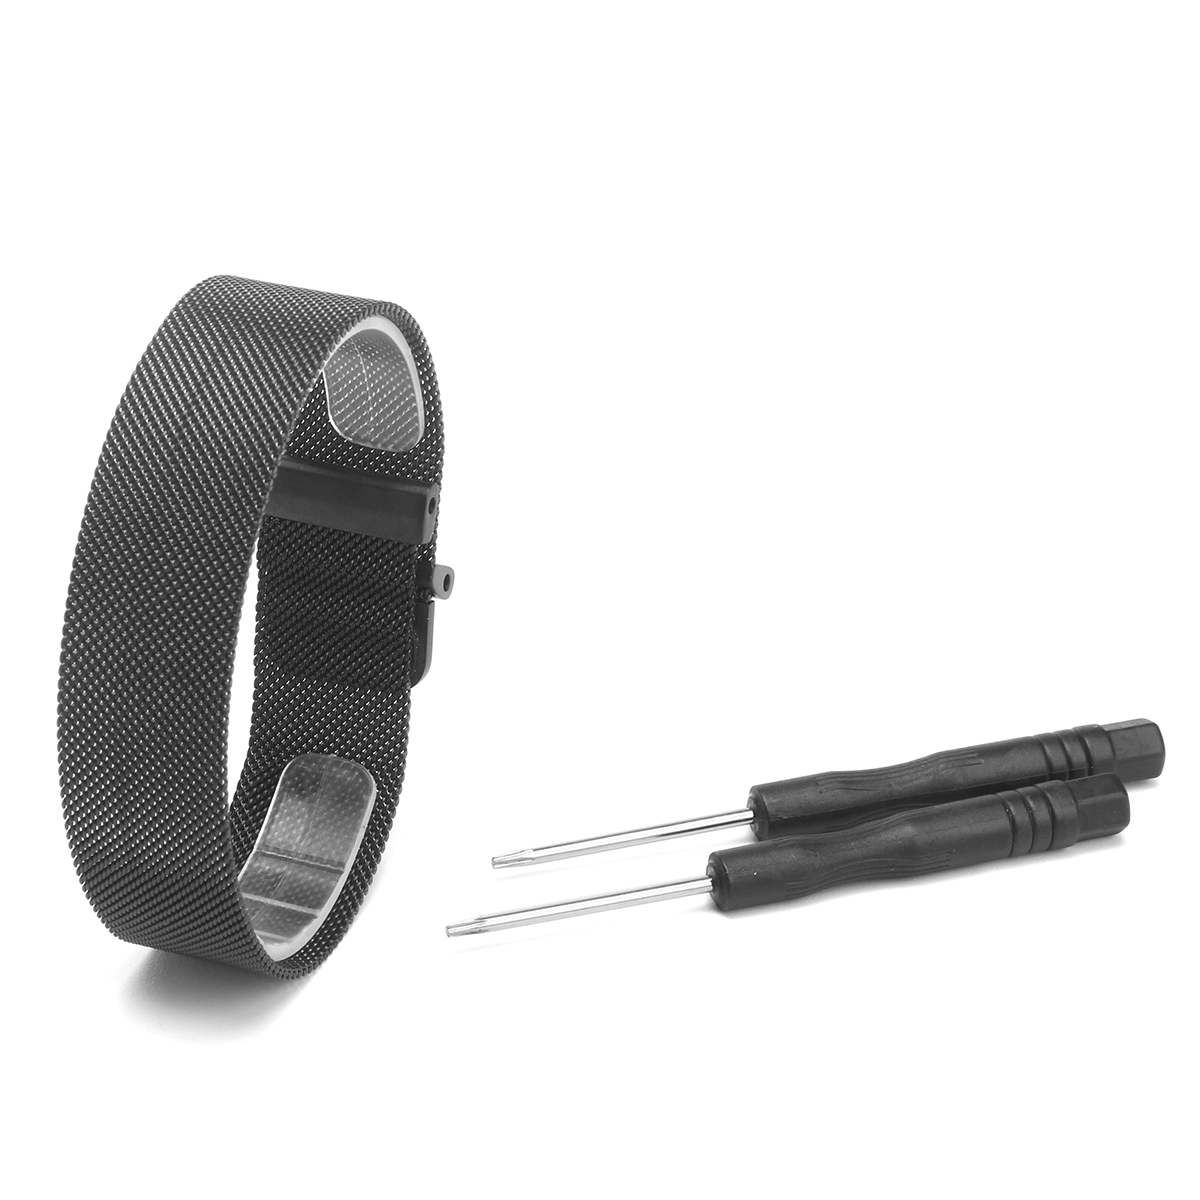 Milanese-Stainless-Steel-Magnetic-Band-Wrist-Strap-with-Tool-for-Garmin-Vivoactive-Watch-1249145-6